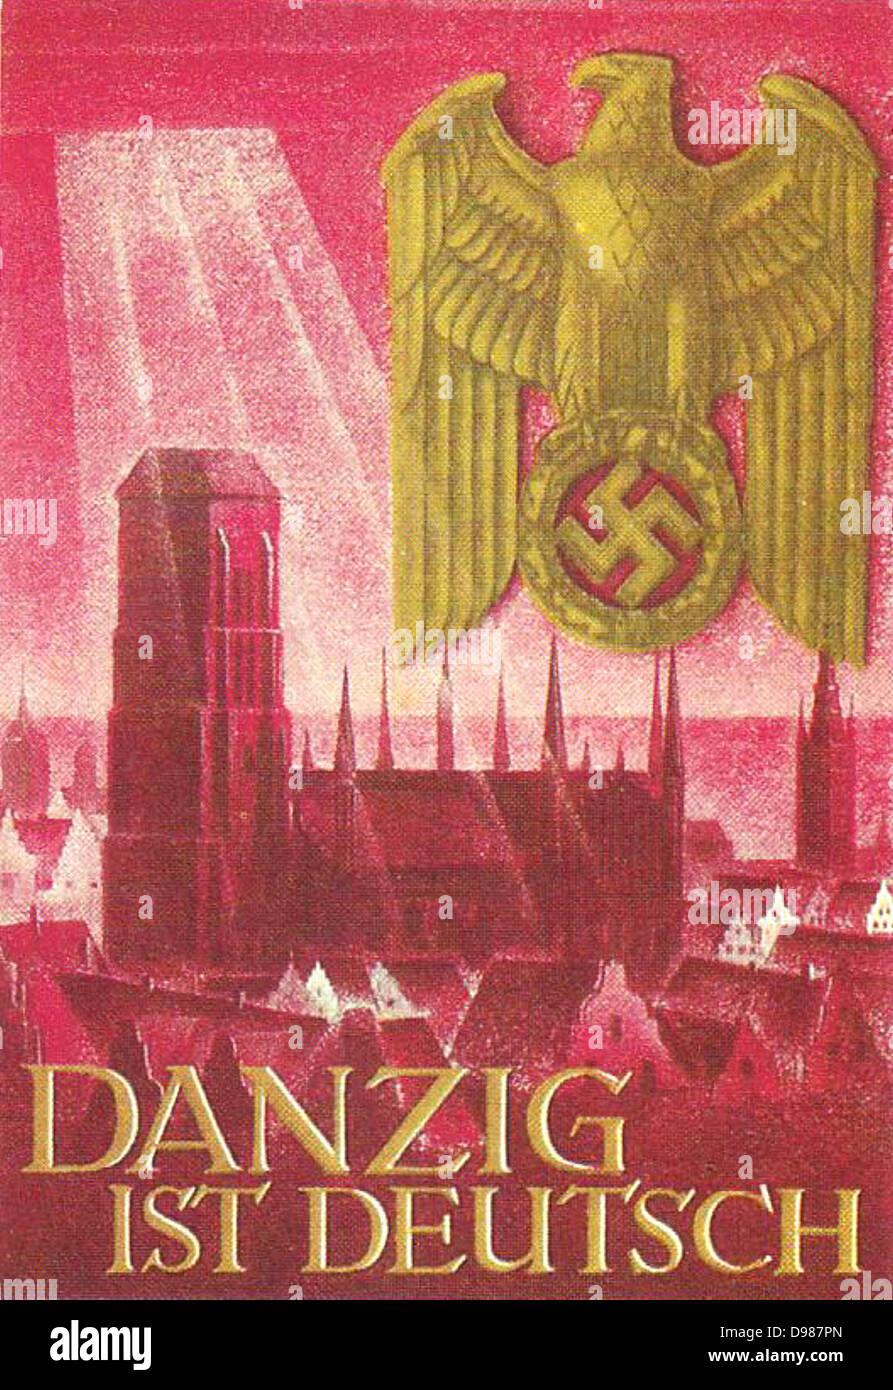 Danzig ist Deutsch': When Poland regained independence in 1919 under the Treaty of Versailles Danzig (Gdansk), with a 98% German population, was designated the Free City of Danzig under mainly Polish control. With the beginning of the Second World War on 2 September 1939 with the German invasion of Poland, Danzig was 'reclaimed' by Germany. Stock Photo